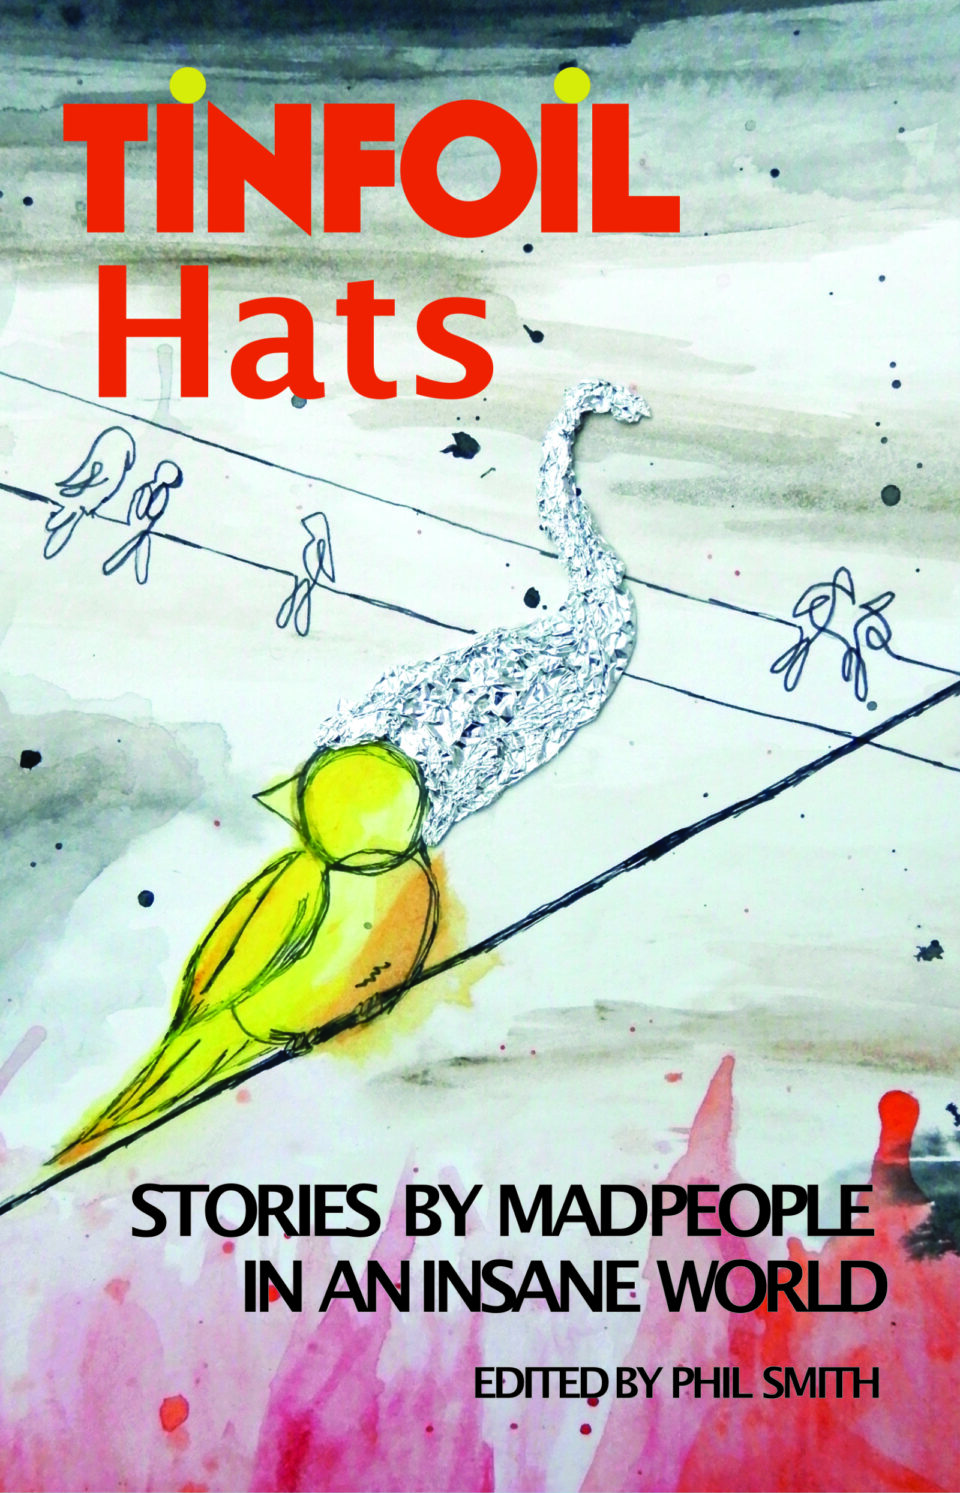 Tinfoil hats cover image: an illustration of a   yellow painted bird sits on a line representing a branch with a tinfoil bird shaped shadow behind it.